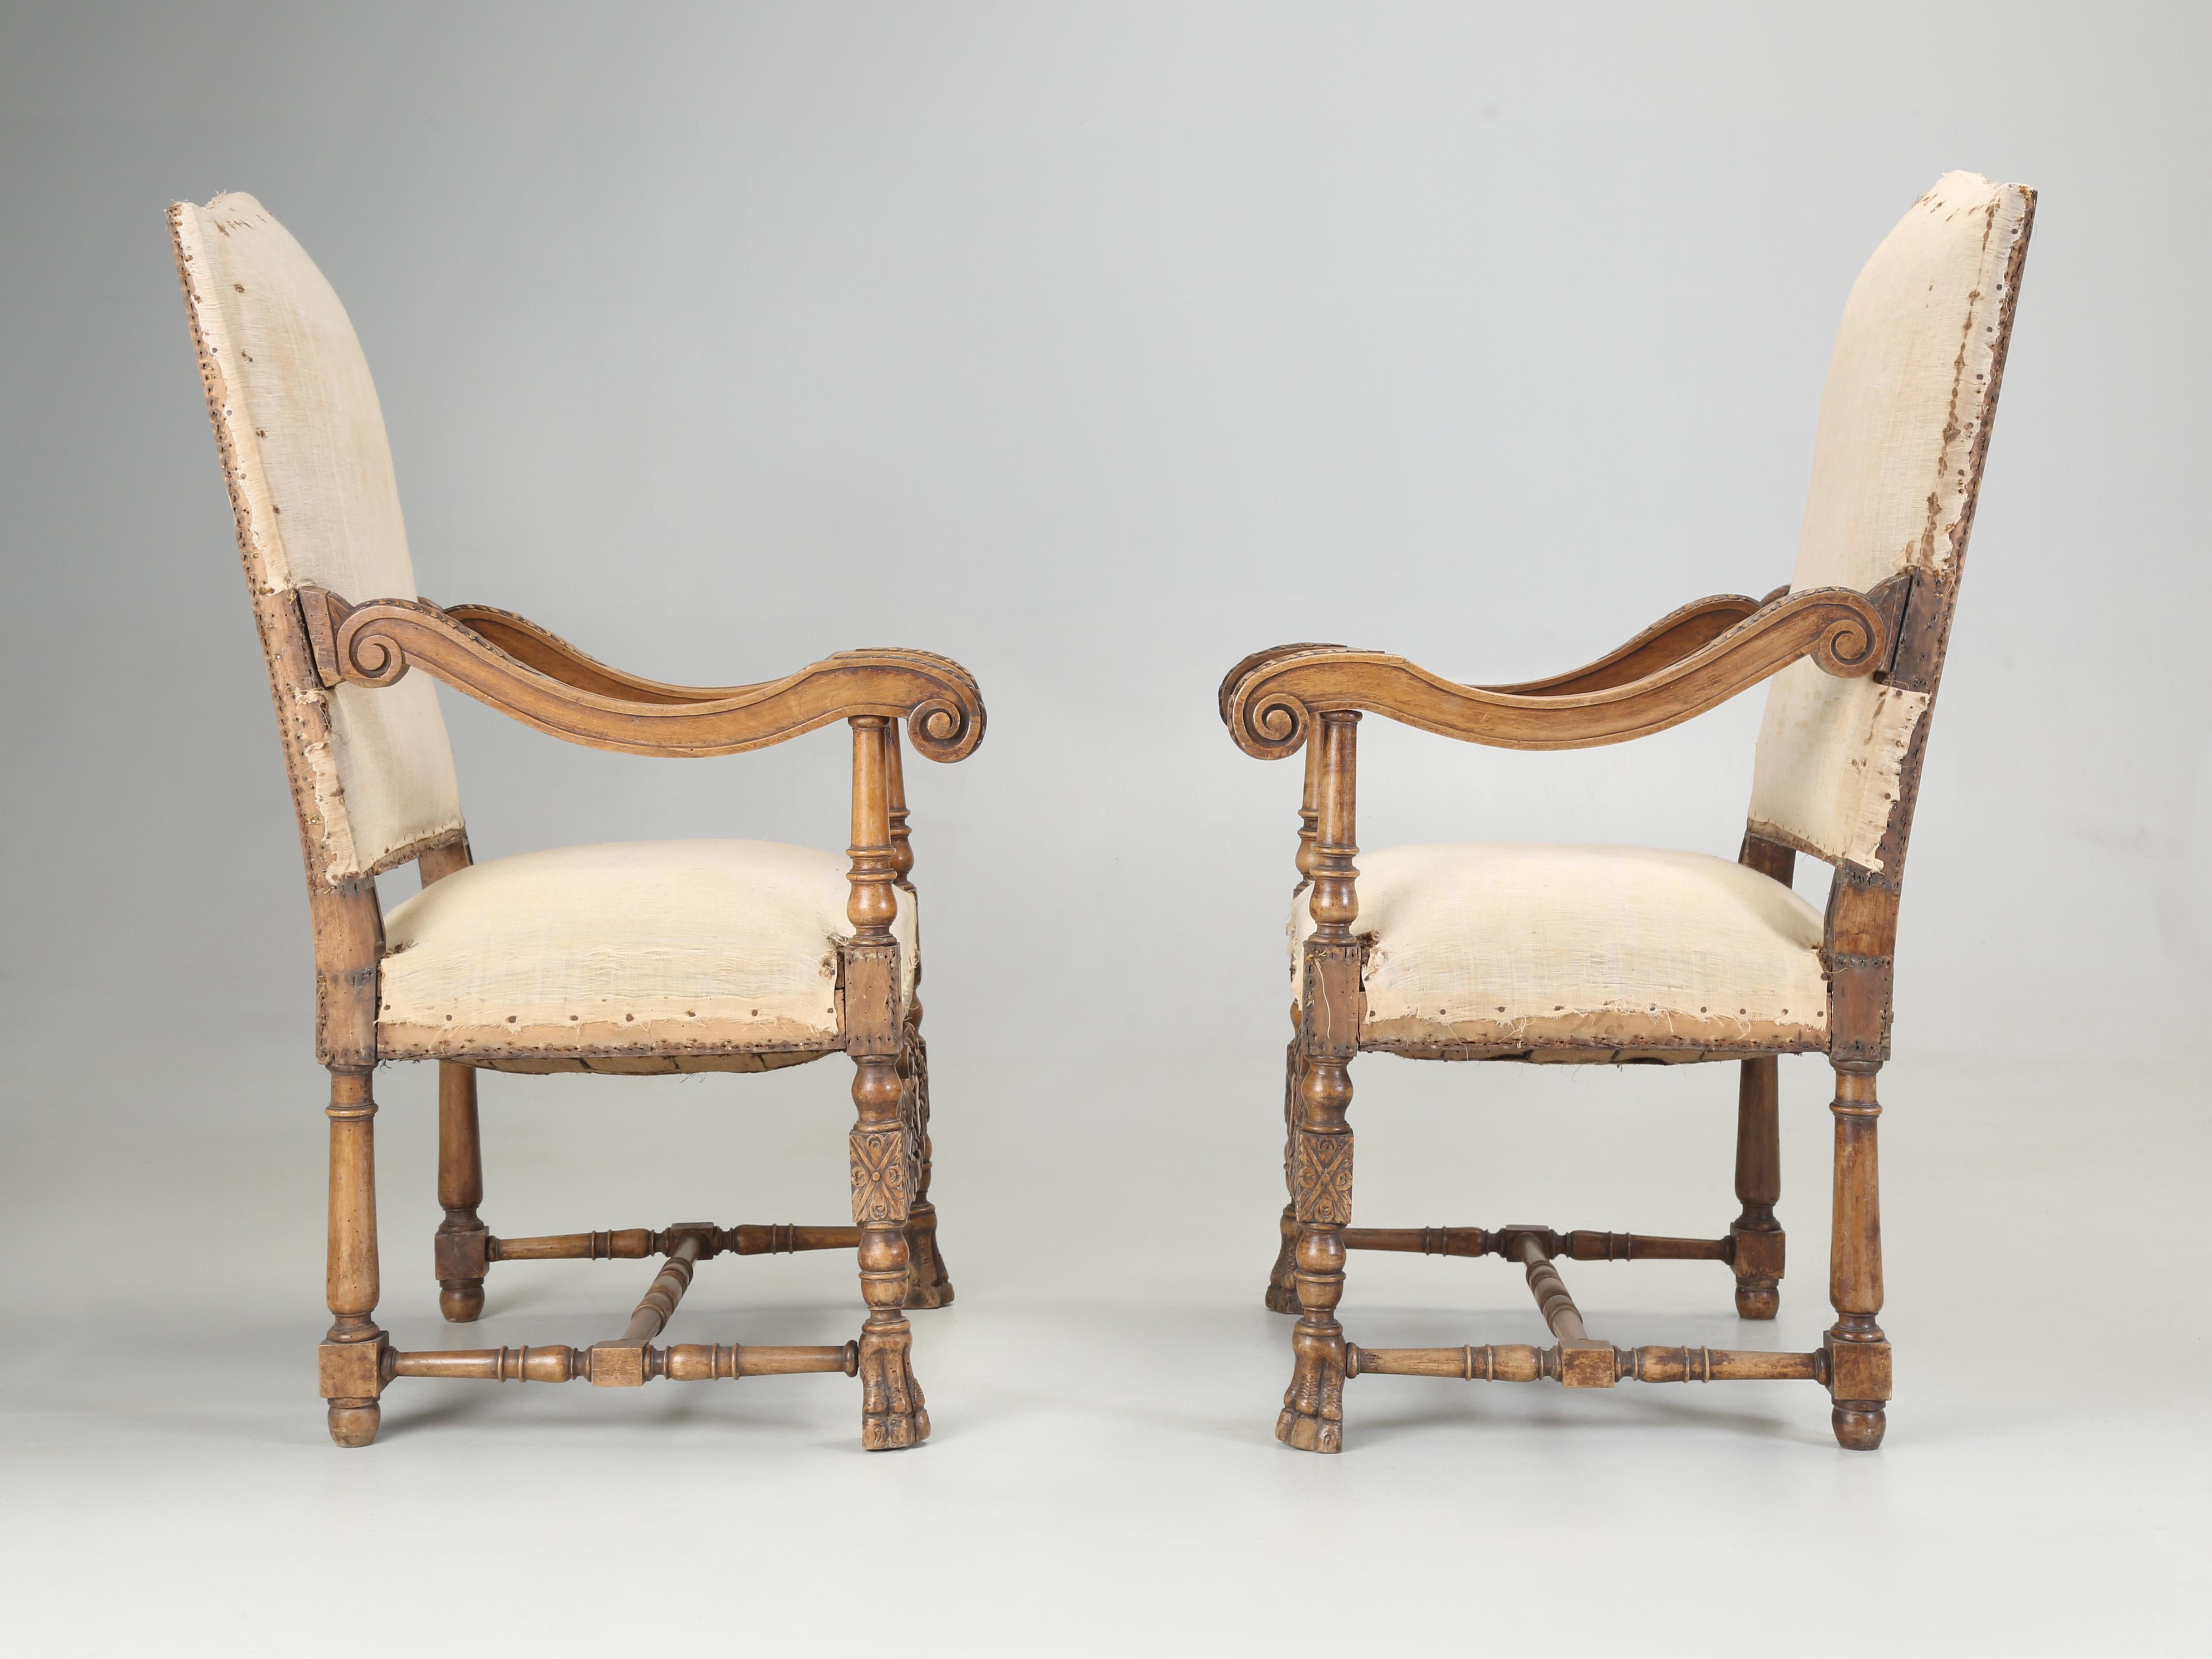 Antique Pair of Italian Armchairs Hand Carved Walnut Require Restoration, C1880s For Sale 10